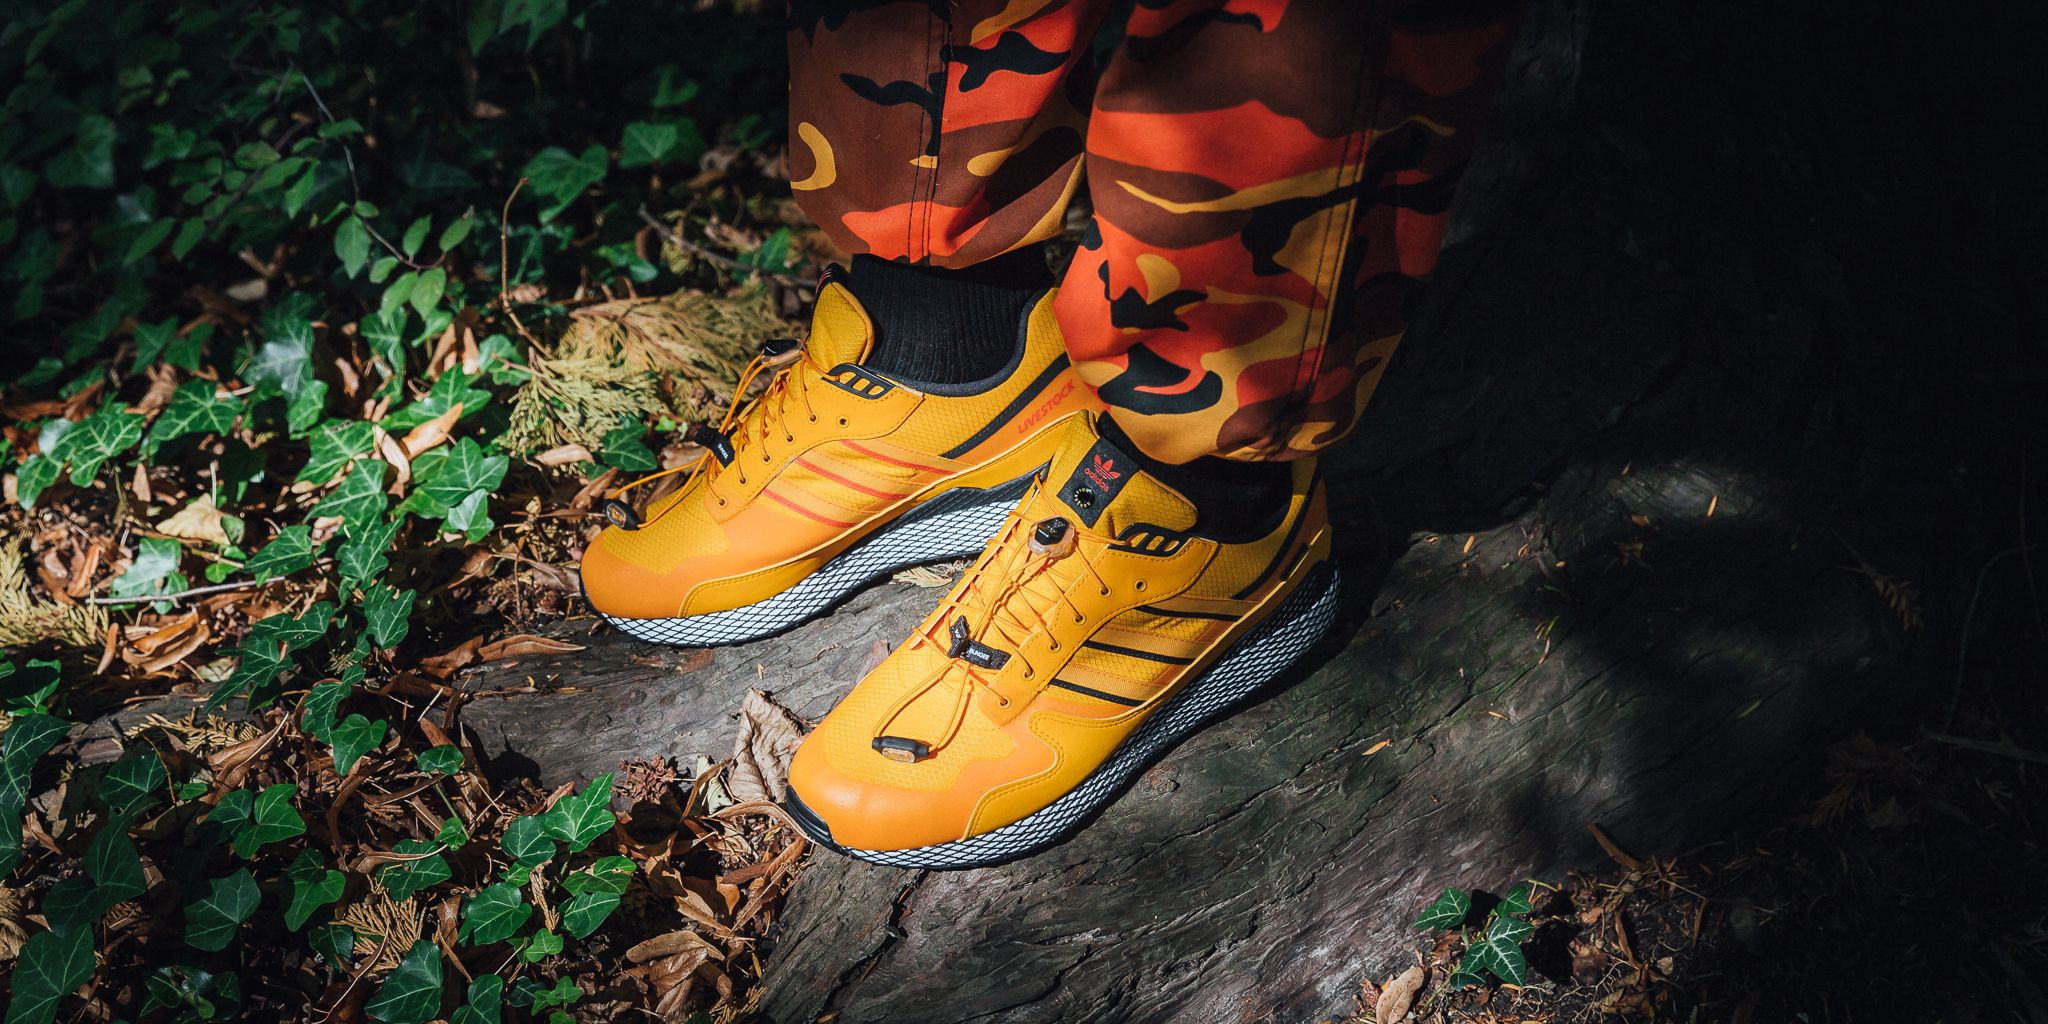 Titolo on Twitter: "Livestock x Adidas Ultra Tech GTX in "Yellow/Yellow/Black" Release ⚠️ Saturday, 29th September ⚠️ 0.00AM CET the webSHOP ➡️ https://t.co/xP5Cvjo1mP #adidas #livestock #consortium #ultratech ...